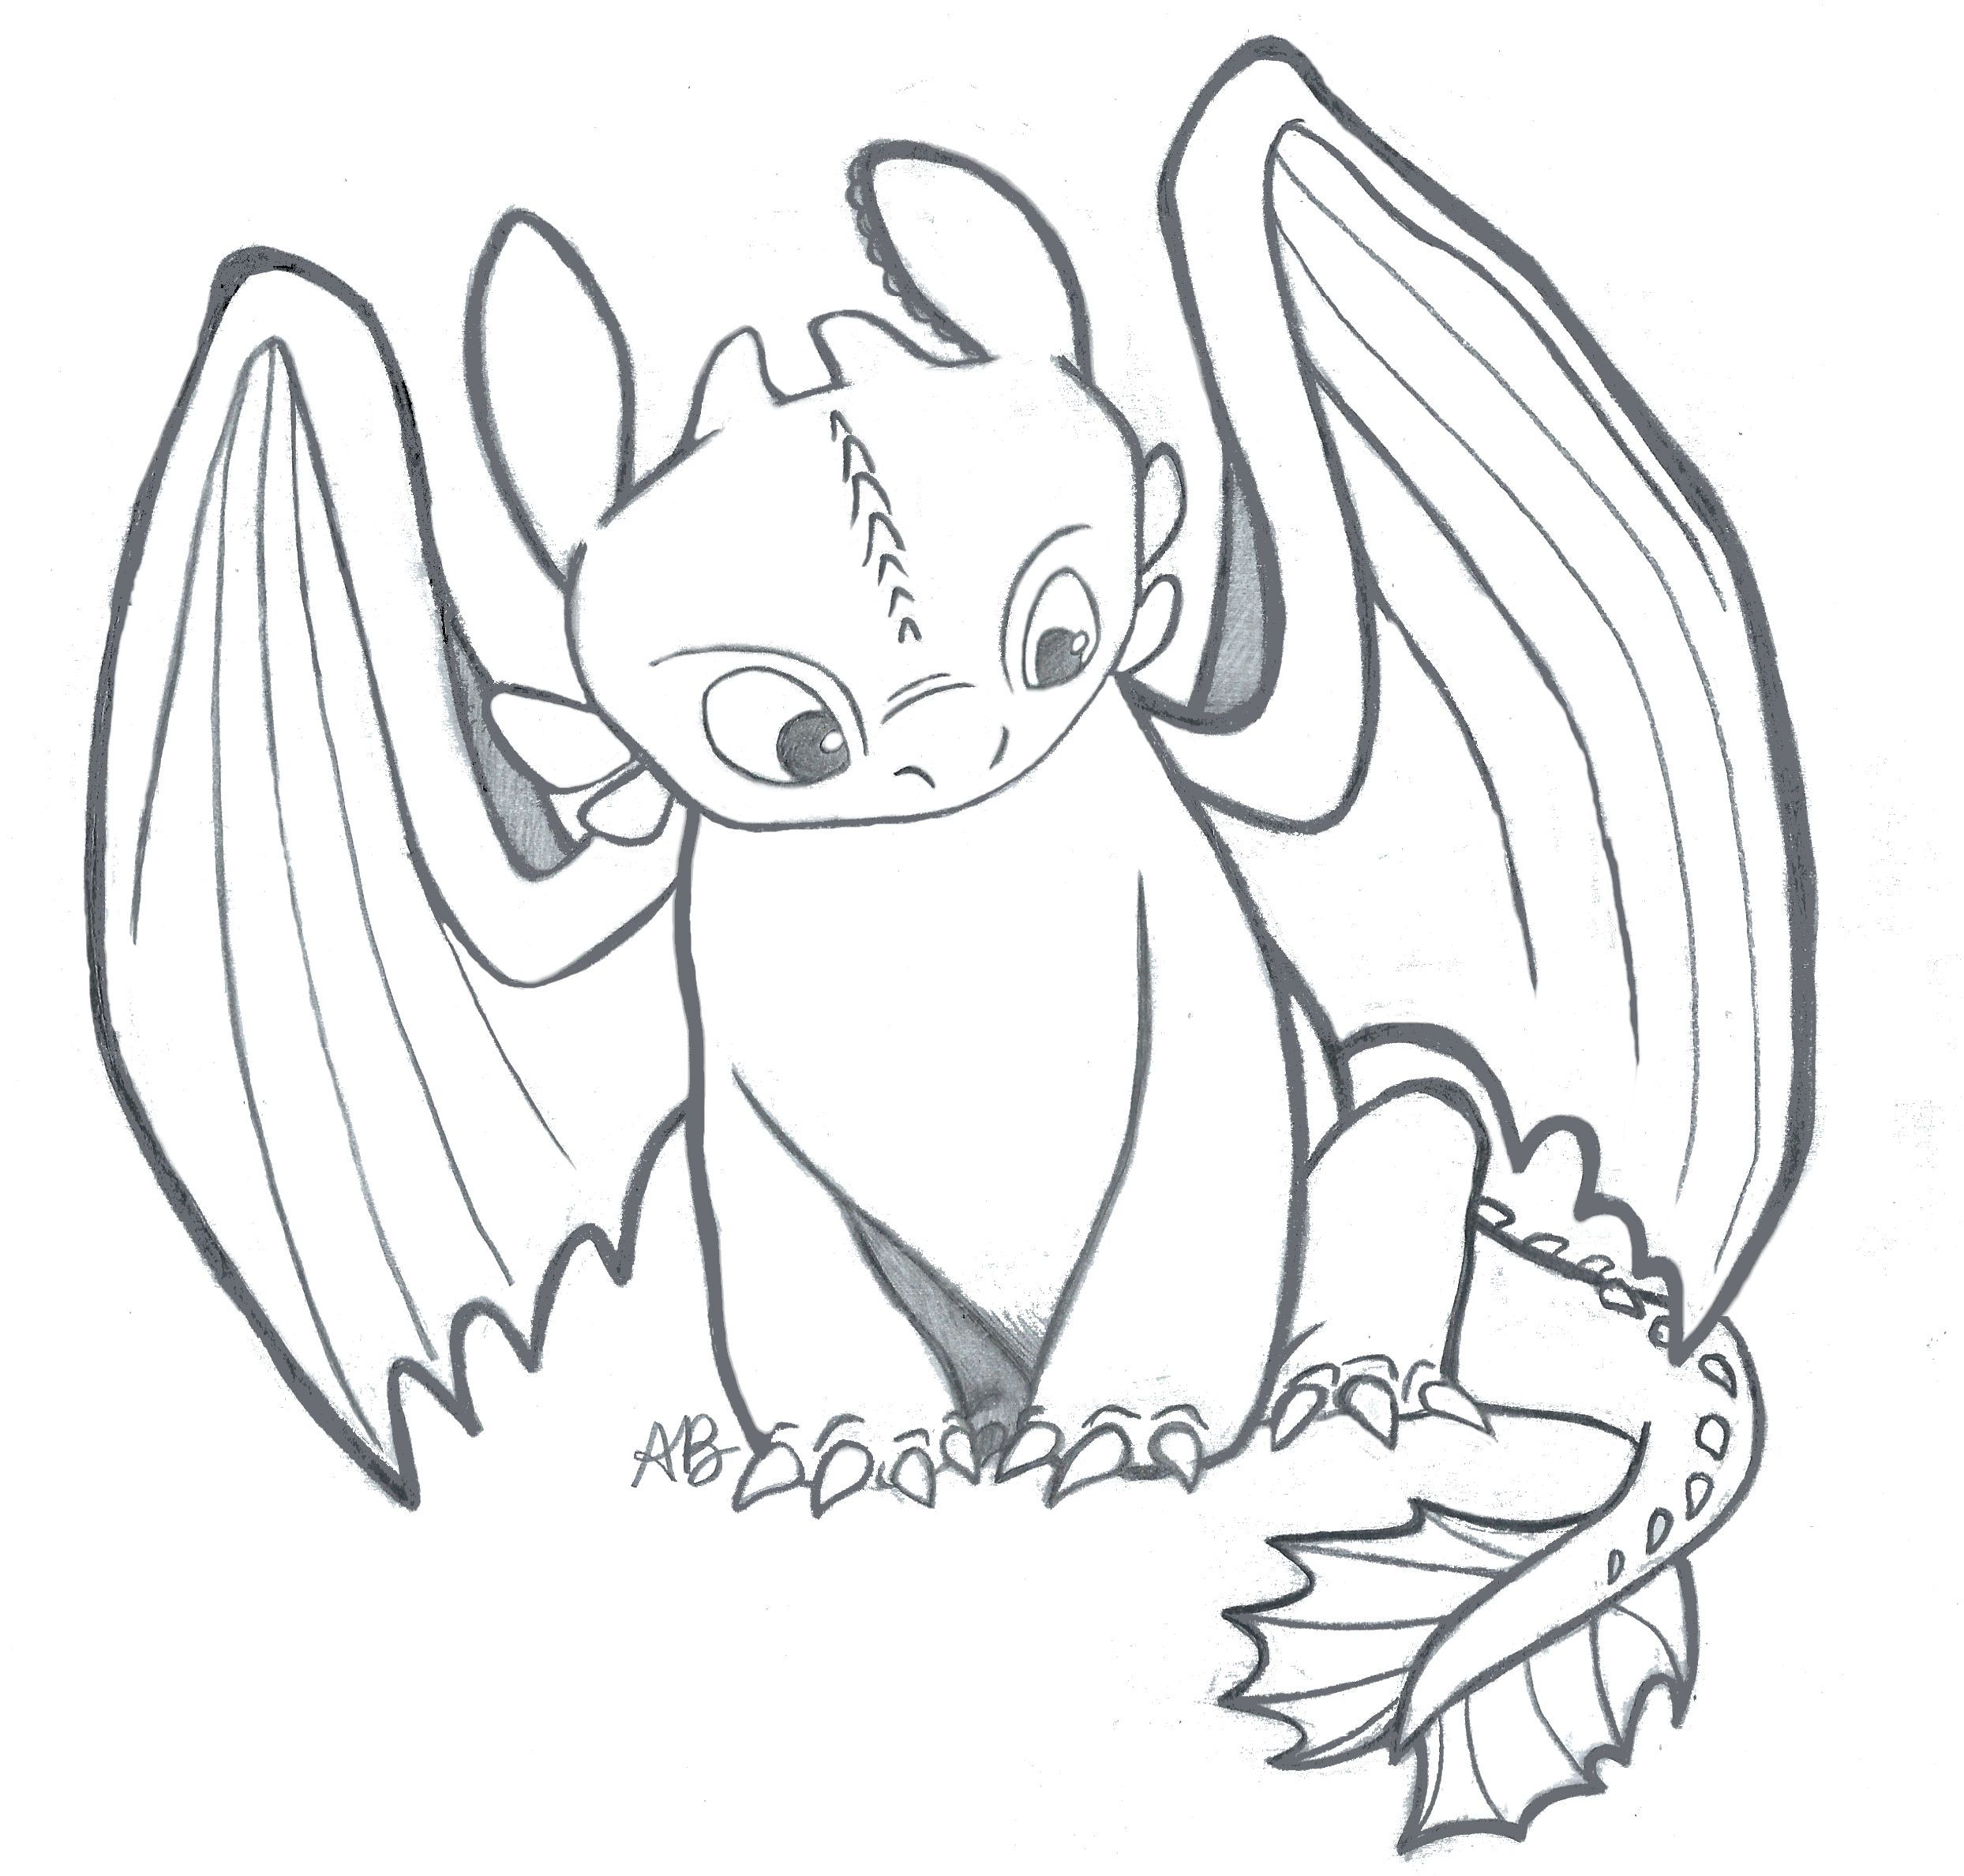 2488x2376 I Drew This Sketch Of Toothless From How To Train Your Dragon - T...